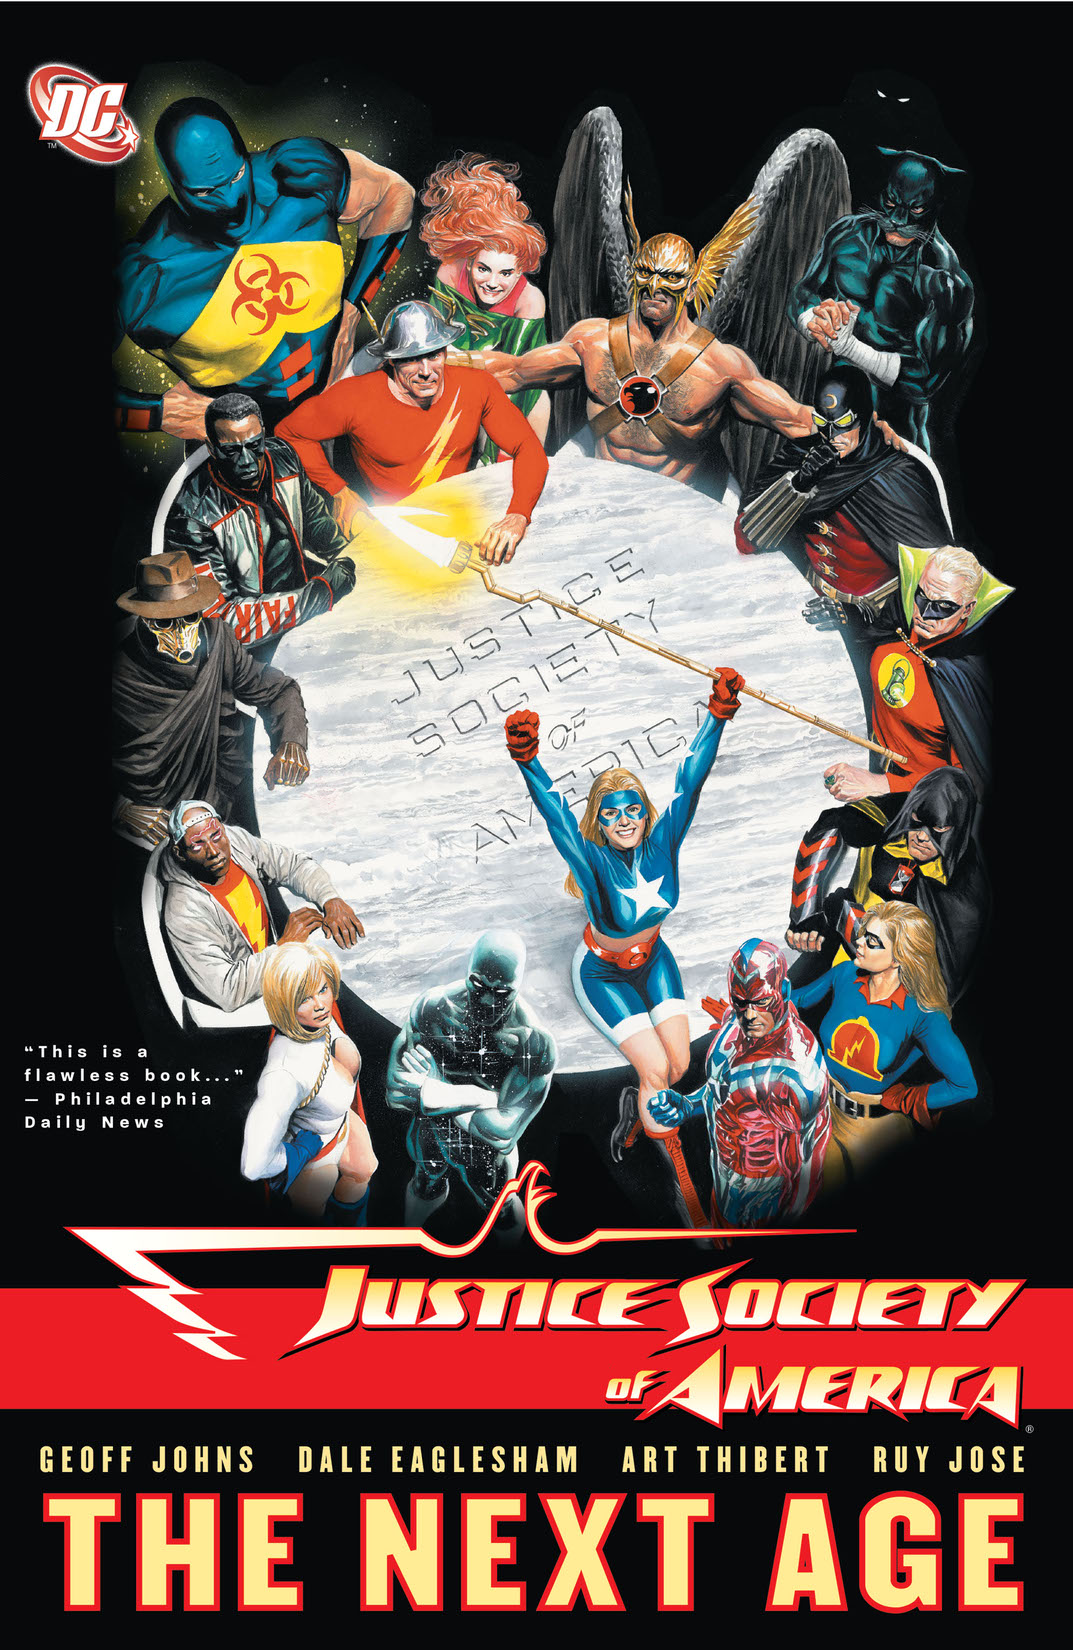 Justice Society of America: The Next Age Vol. 1 preview images